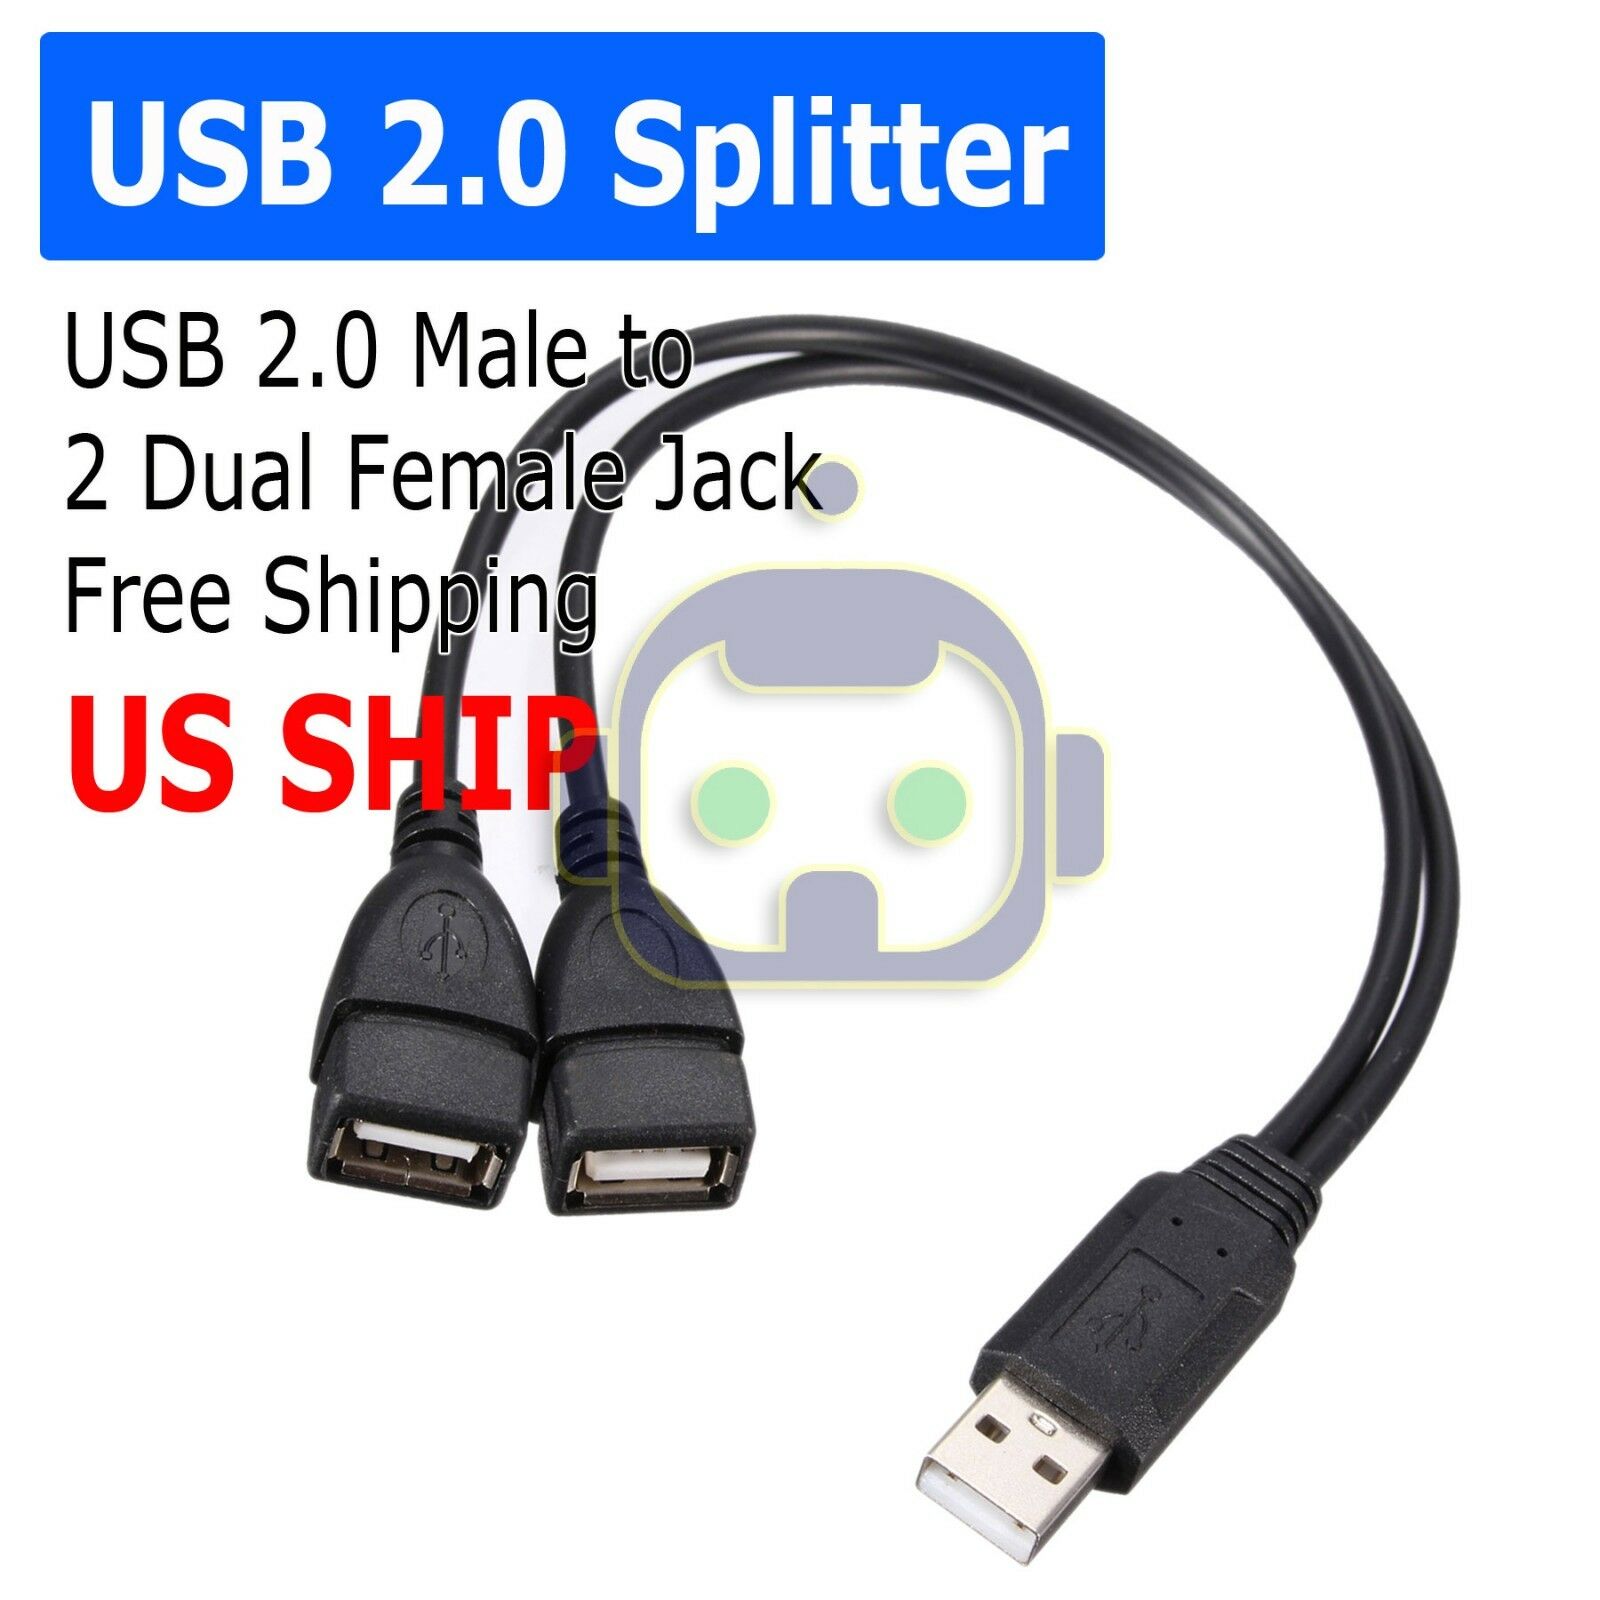 Usb 2.0 A Male To 2 Dual Usb Female Jack Y Splitter Hub Power Cord Adapter Cable